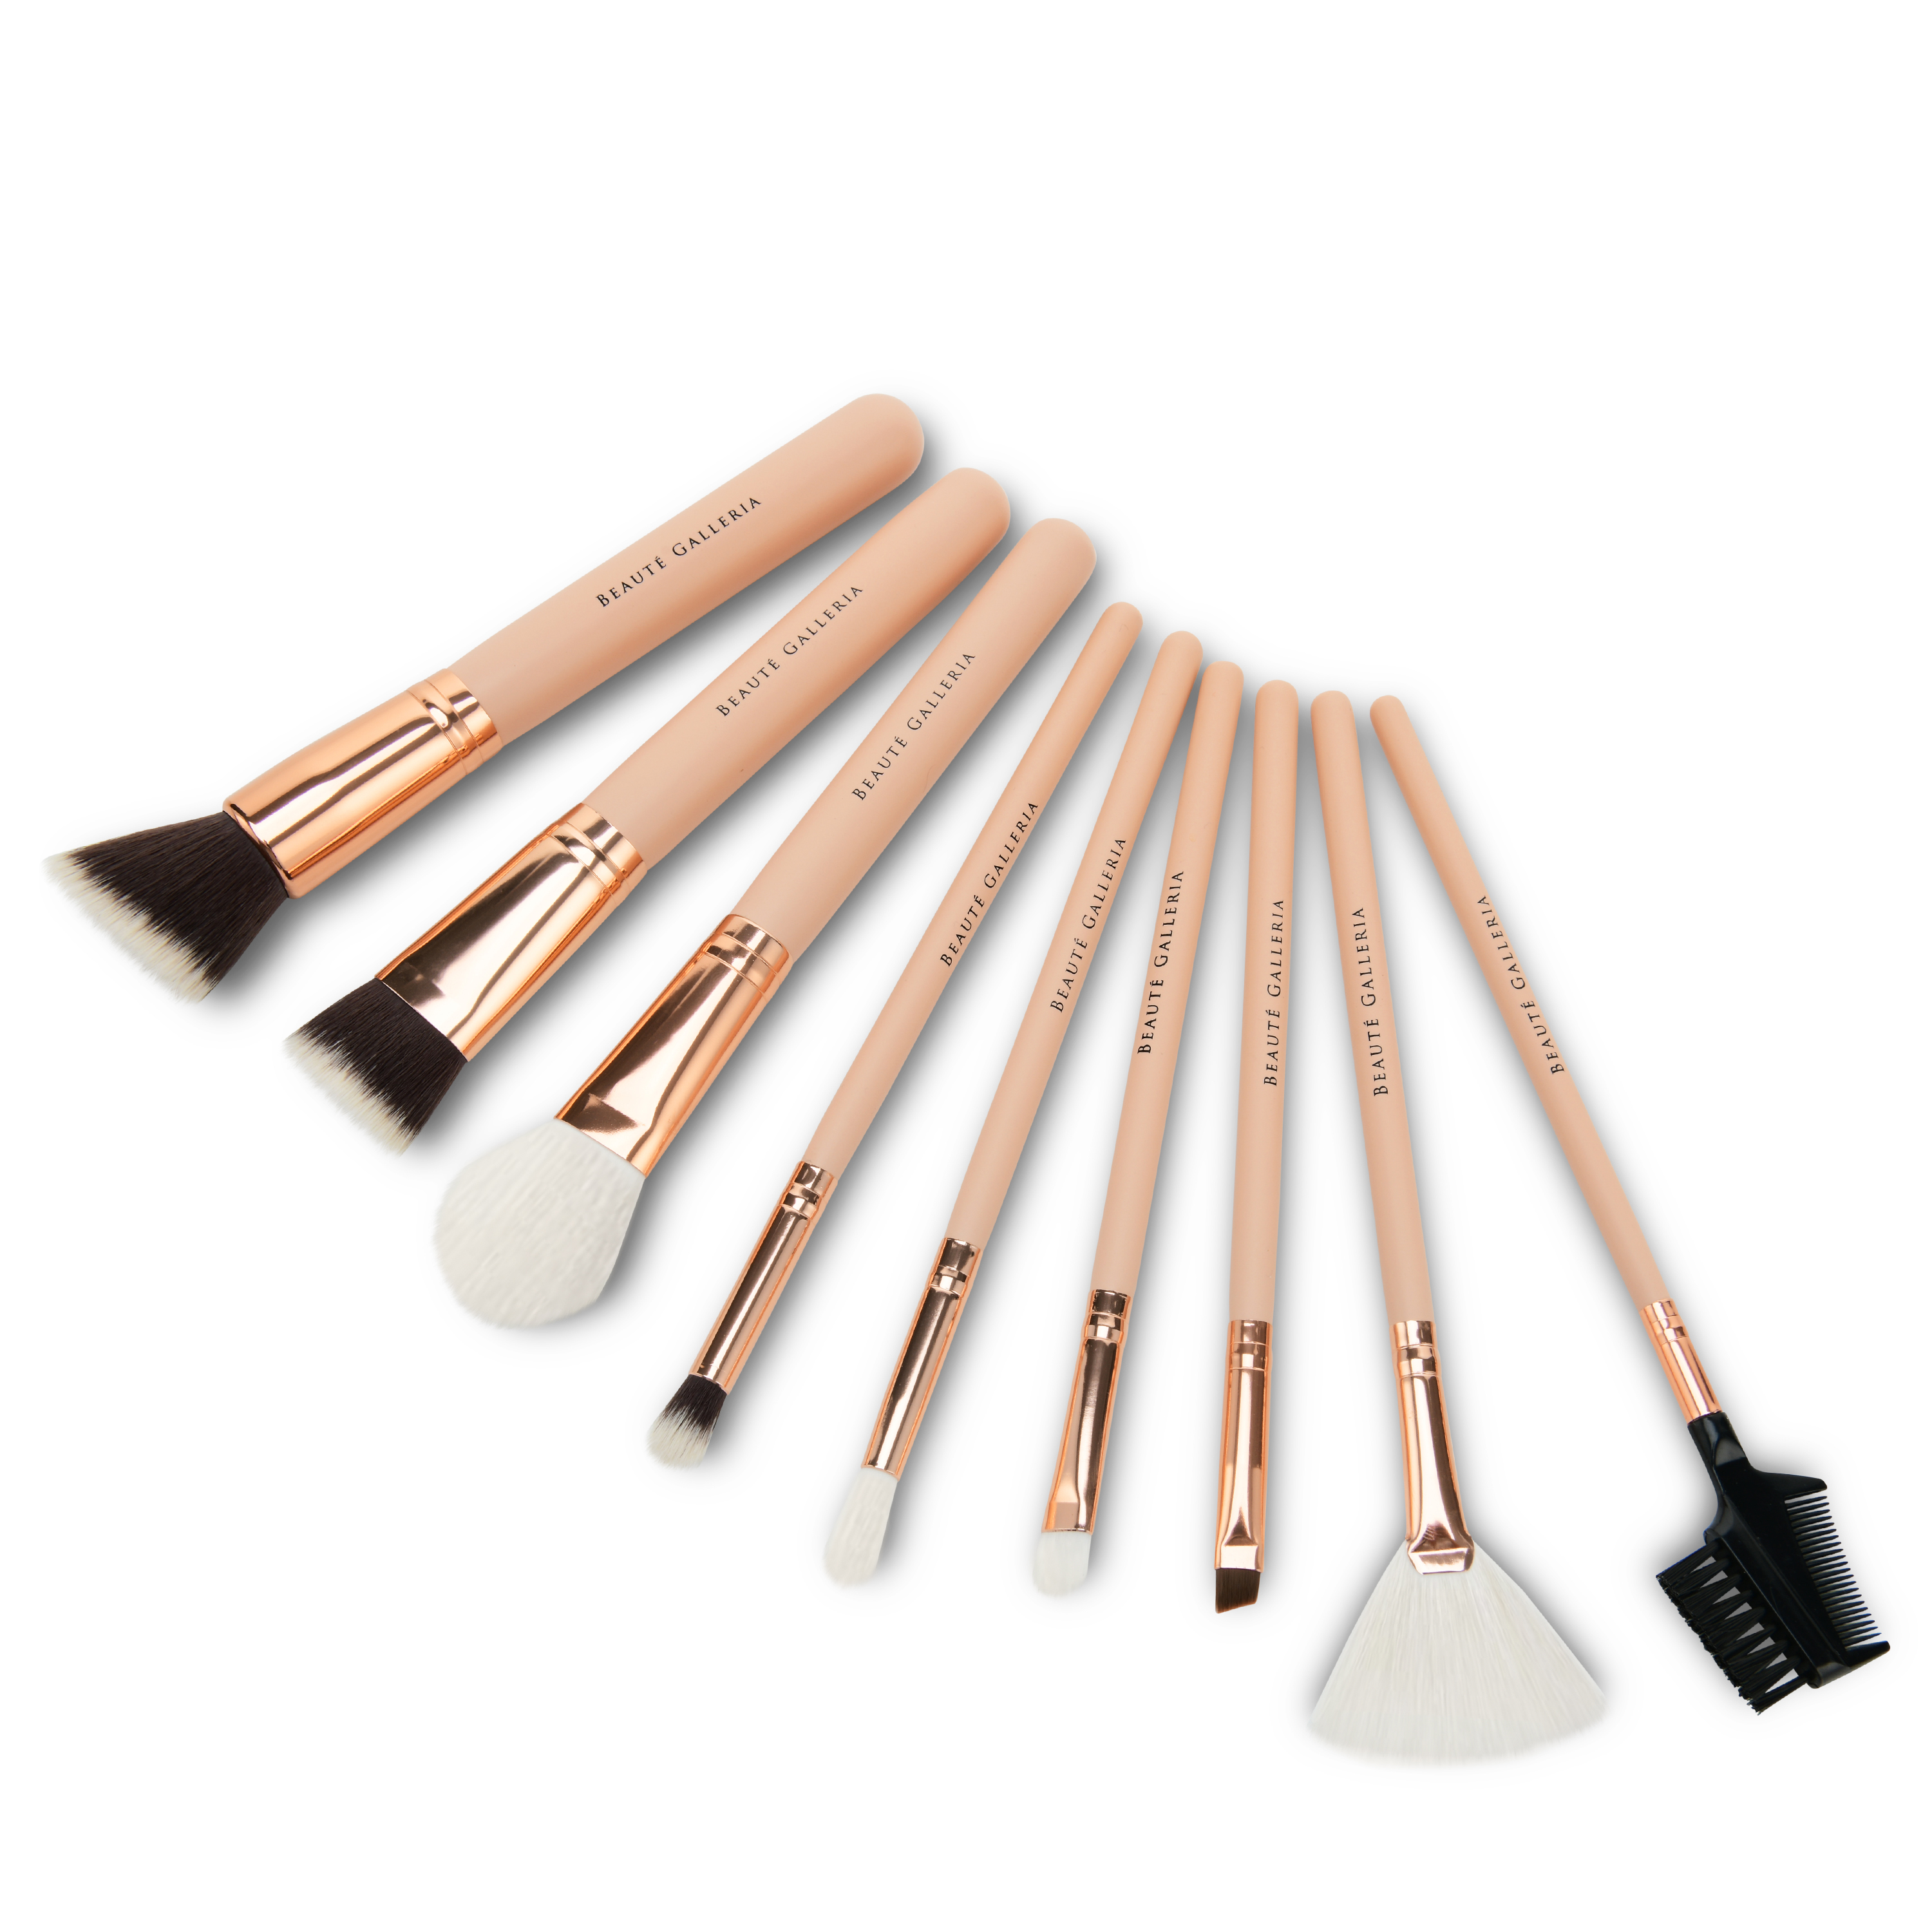 Beaute Galleria Makeup Brush Set, Vegan Cruelty-Free Synthetic Bristles with Travel Pouch Bag, 9 Pieces - image 5 of 8